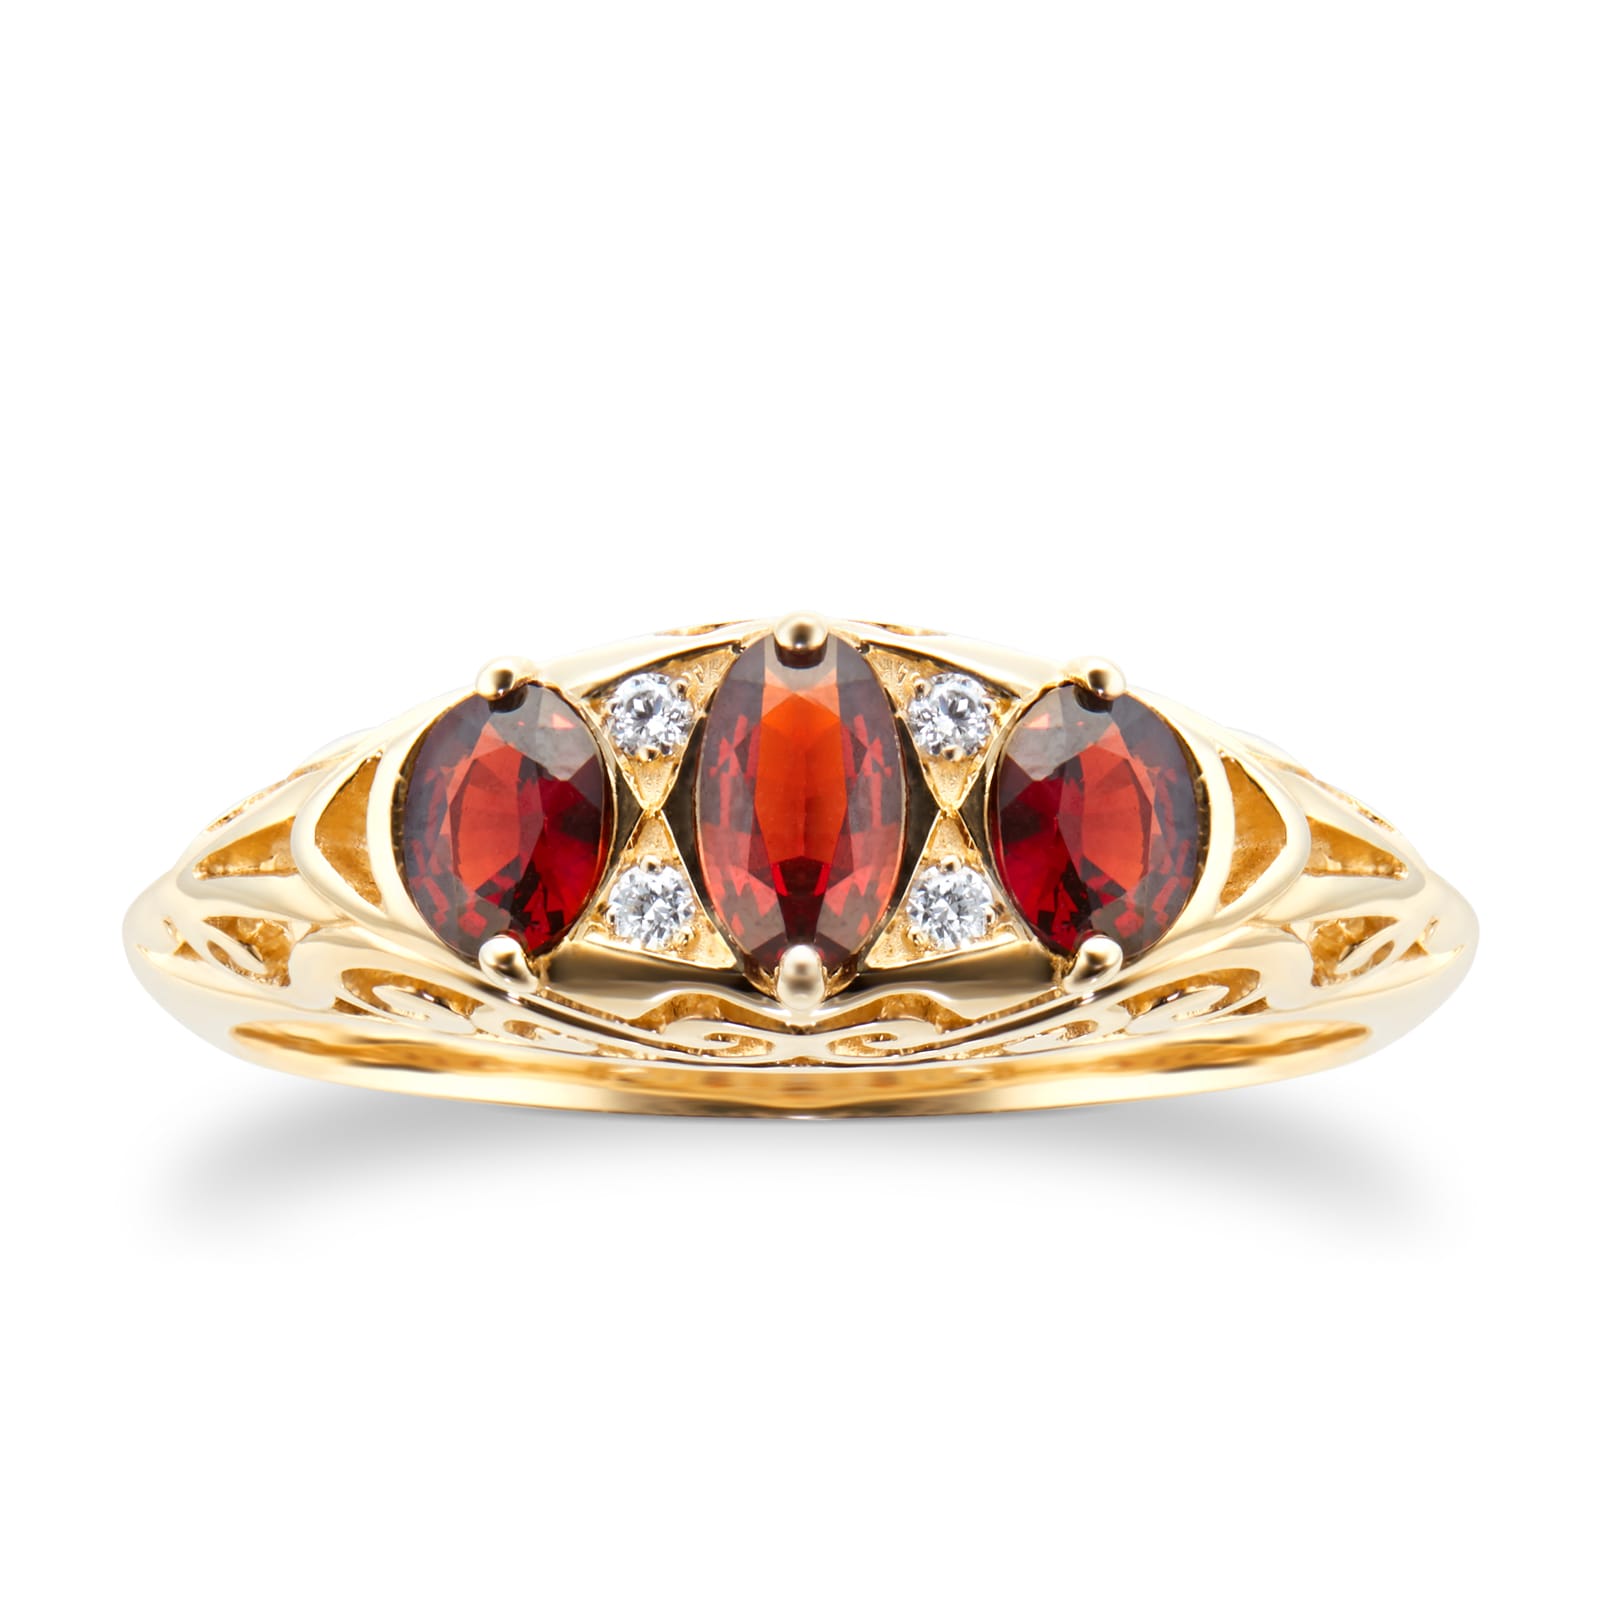 9ct Yellow Gold Victorian Style 3 Stone Garnet & Diamond Ring - Ring Size Y.5